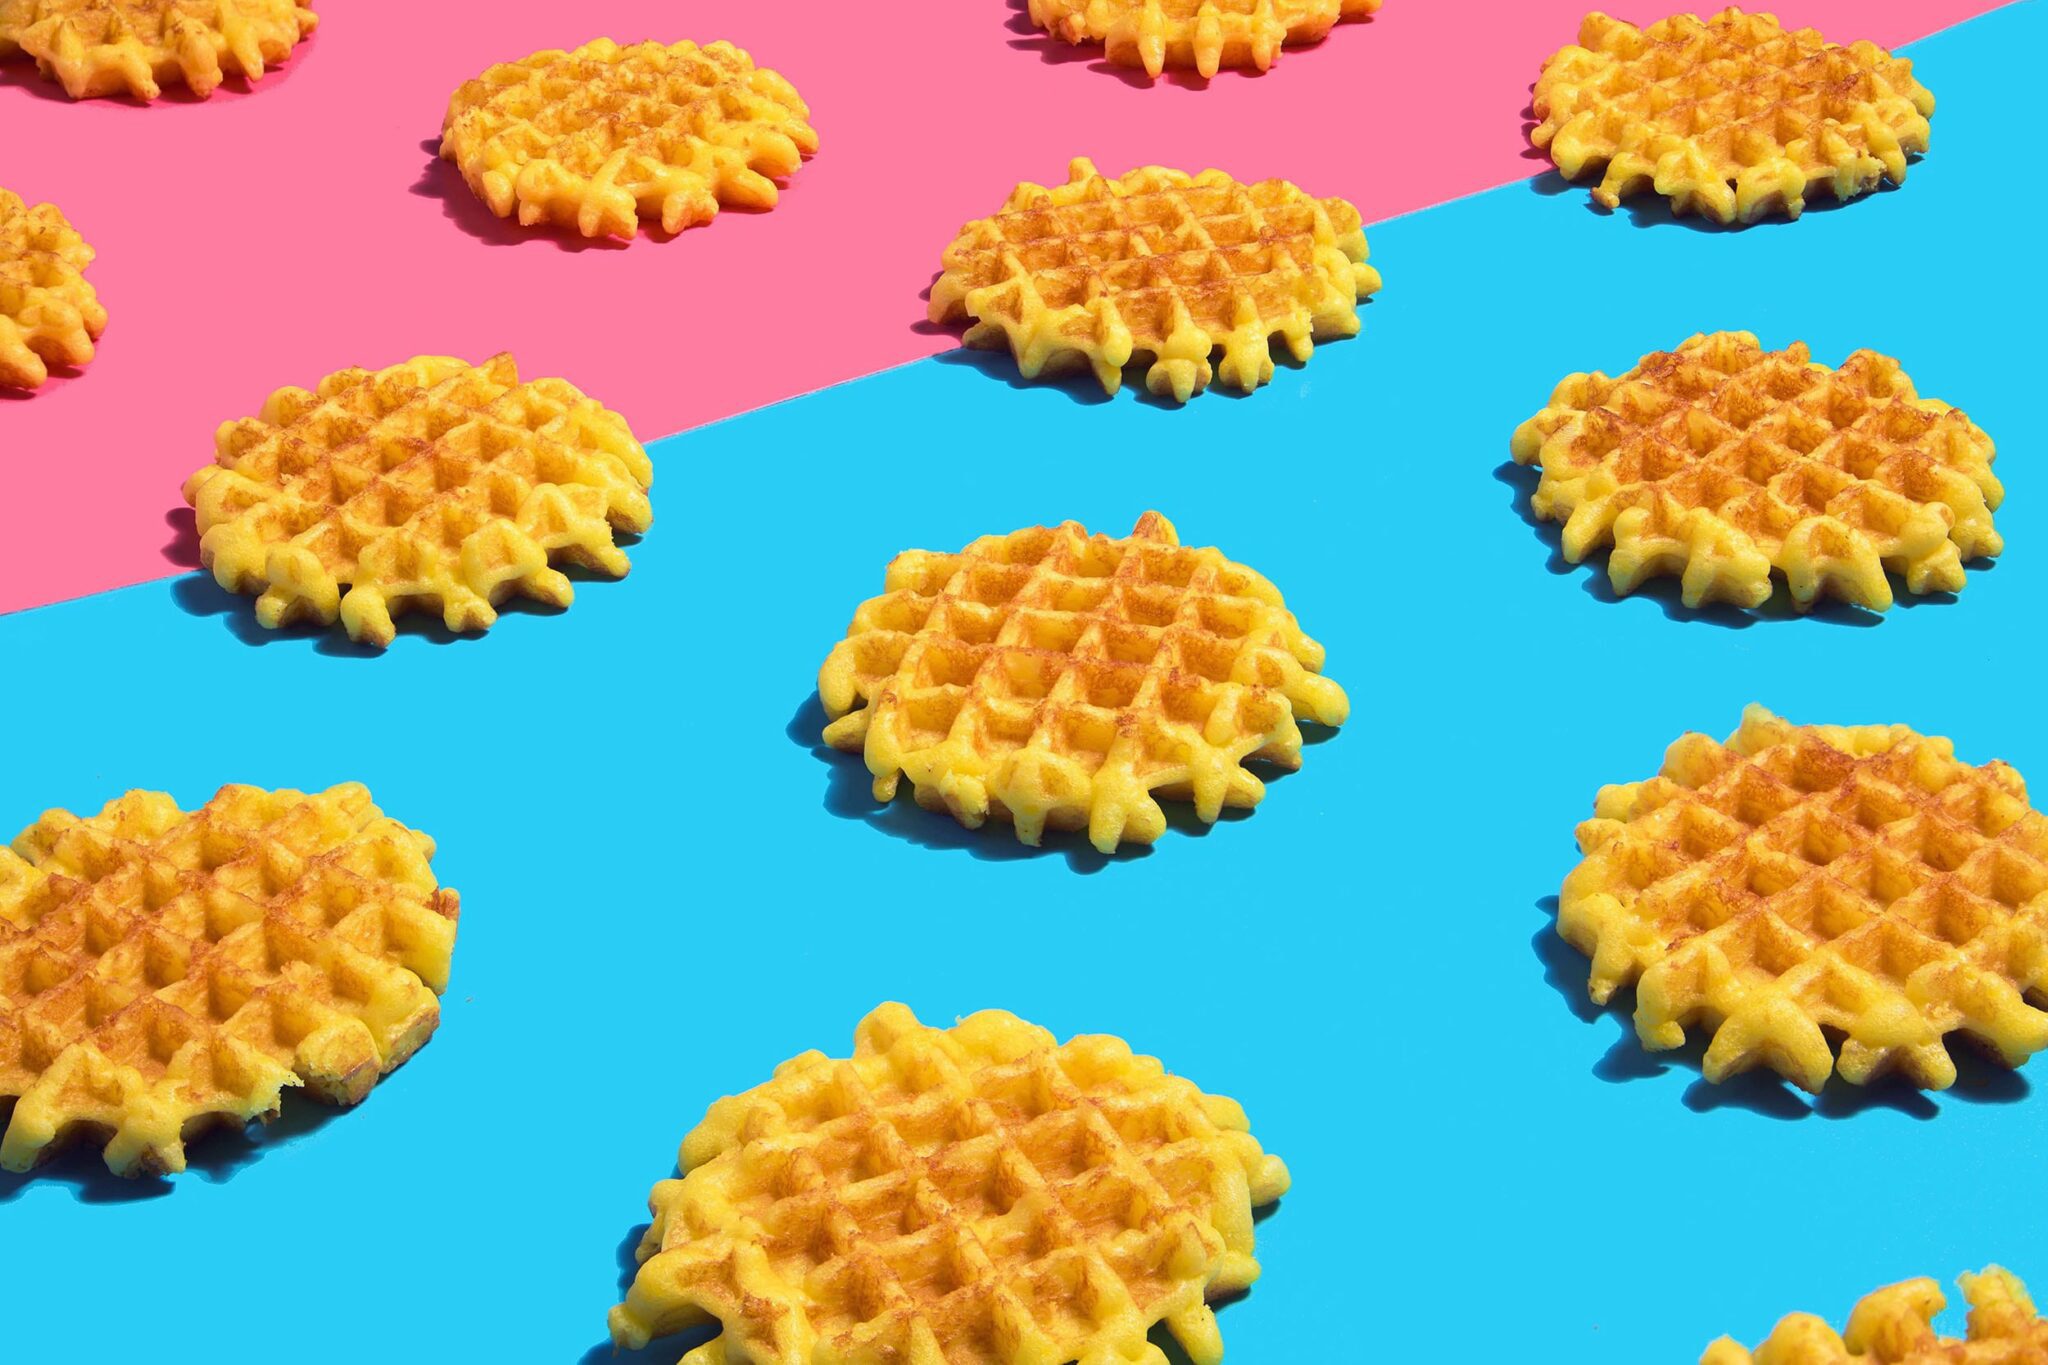 Waffles carefully laid out on blue and pink backgrounds with hard shadows